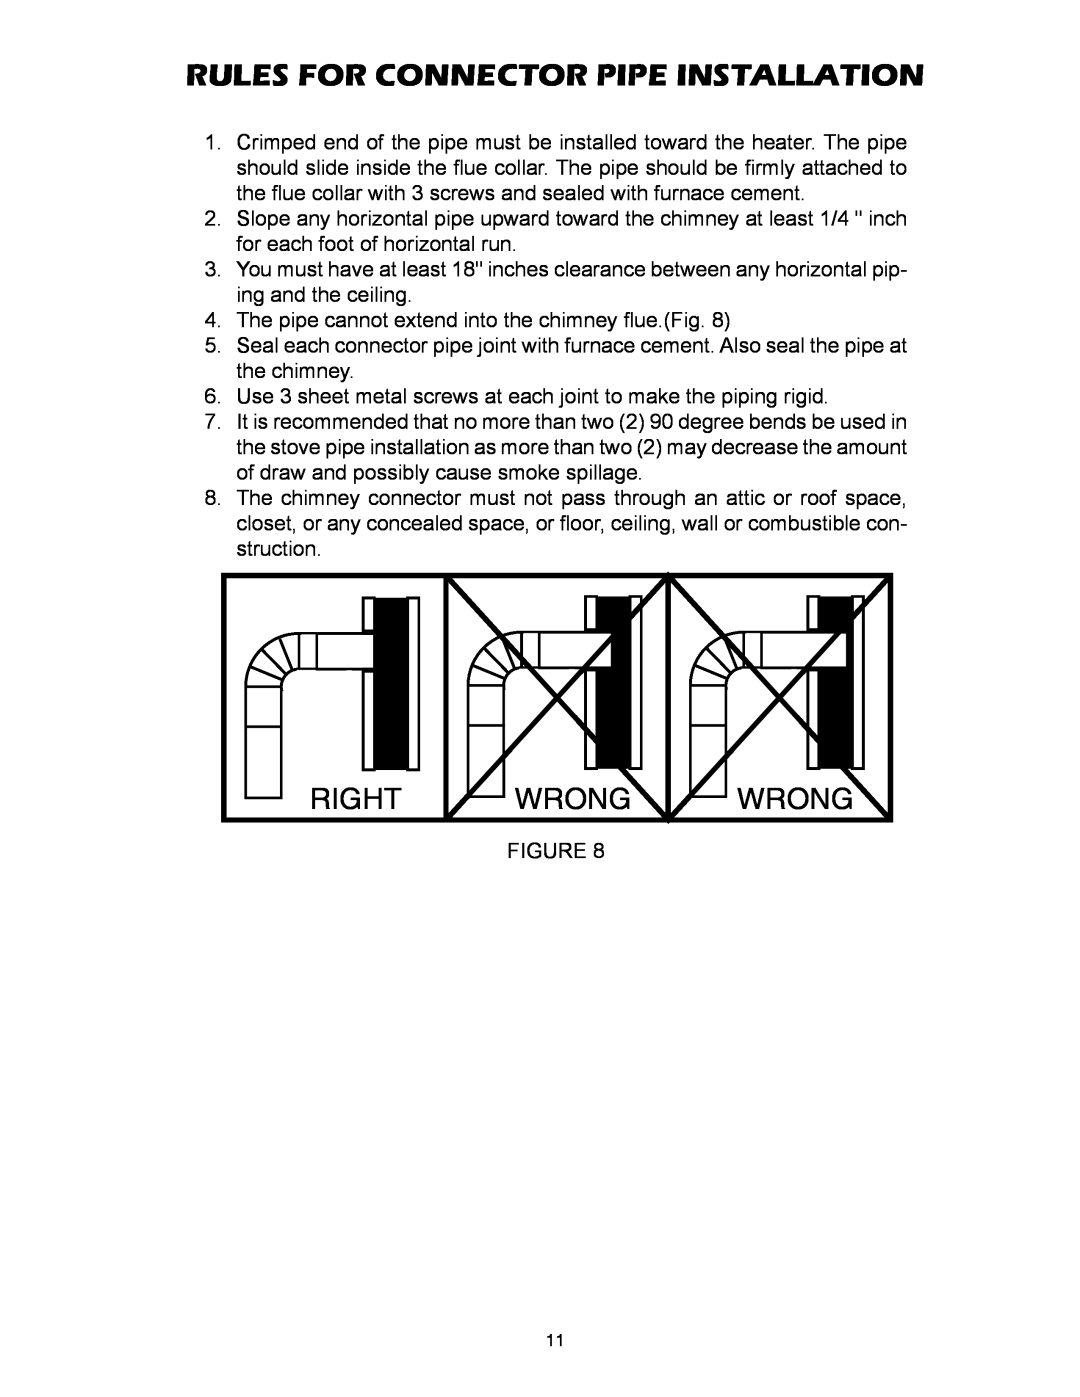 United States Stove 2007B owner manual Rules For Connector Pipe Installation, Right, Wrong 